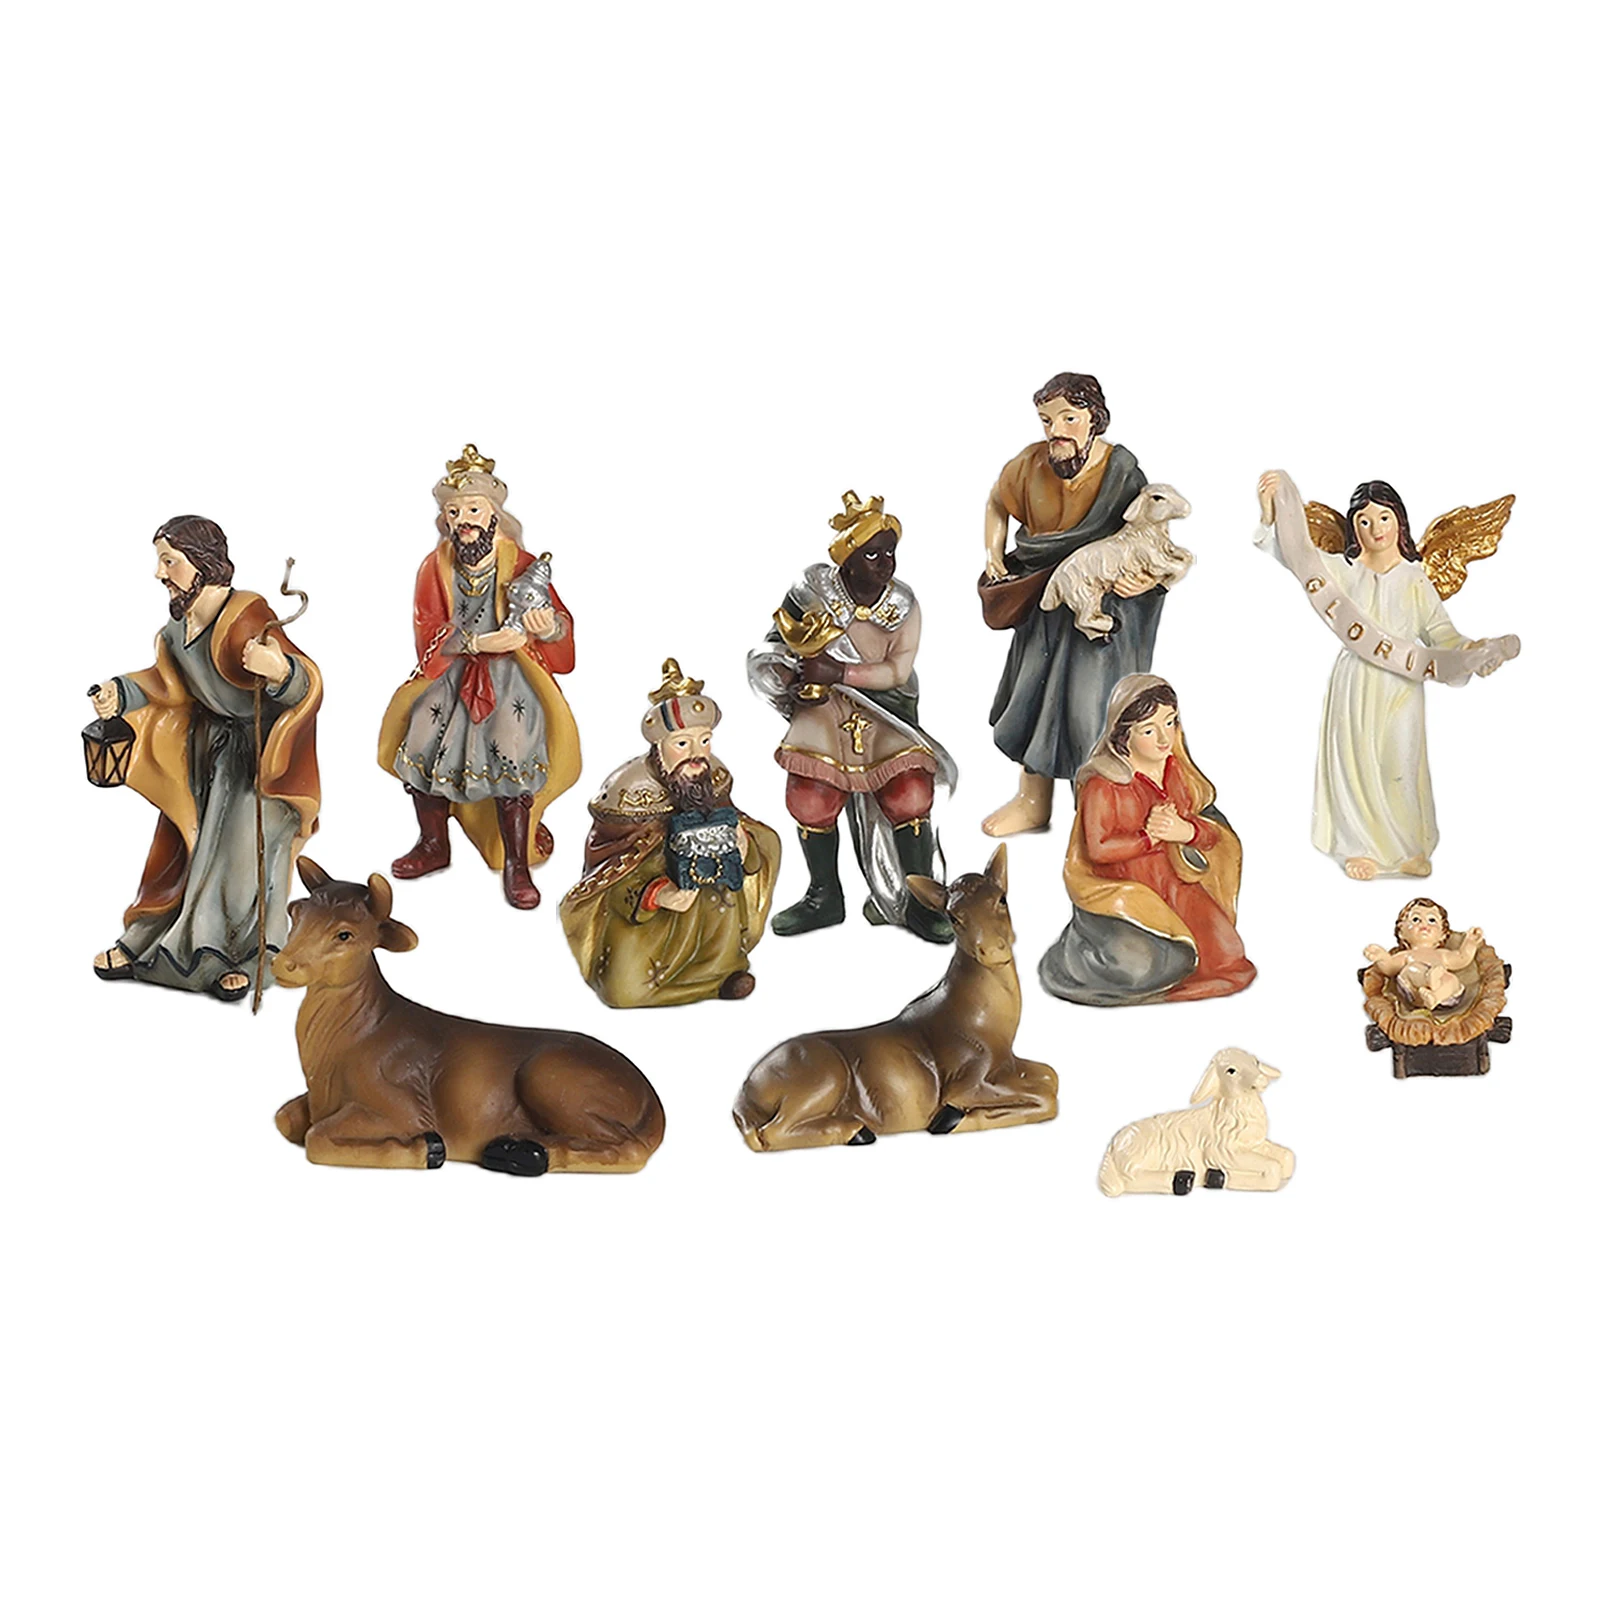 POHOVE 11pcs Christmas Crib Figures,Christmas Nativity Figurines Ornaments,Nativity Figurine,Chapel Decoration,Outdoor Catholic Statues And Figurines Home Decor 